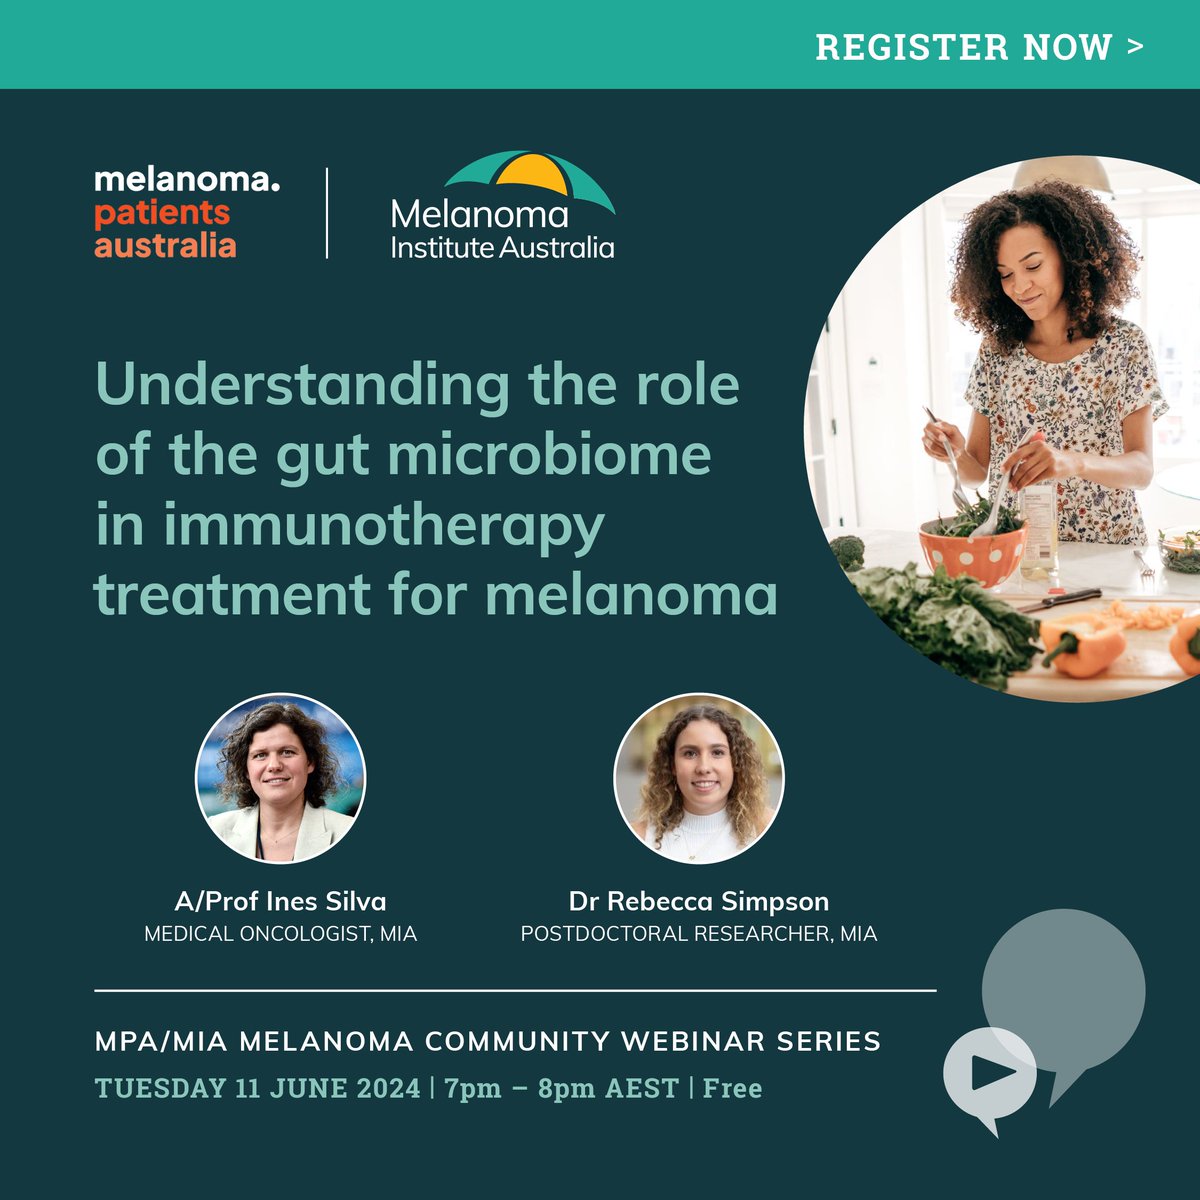 #Melanoma patients & carers: Join MIA & @melanomasupport for informative webinar series. Webinar 2 topic: 'Understanding the role of the gut microbiome in immunotherapy treatment for melanoma'. Presented by A/Prof Ines Silva & Dr Rebecca Simpson. Register> melanoma.org.au/event/mpa-mia-…